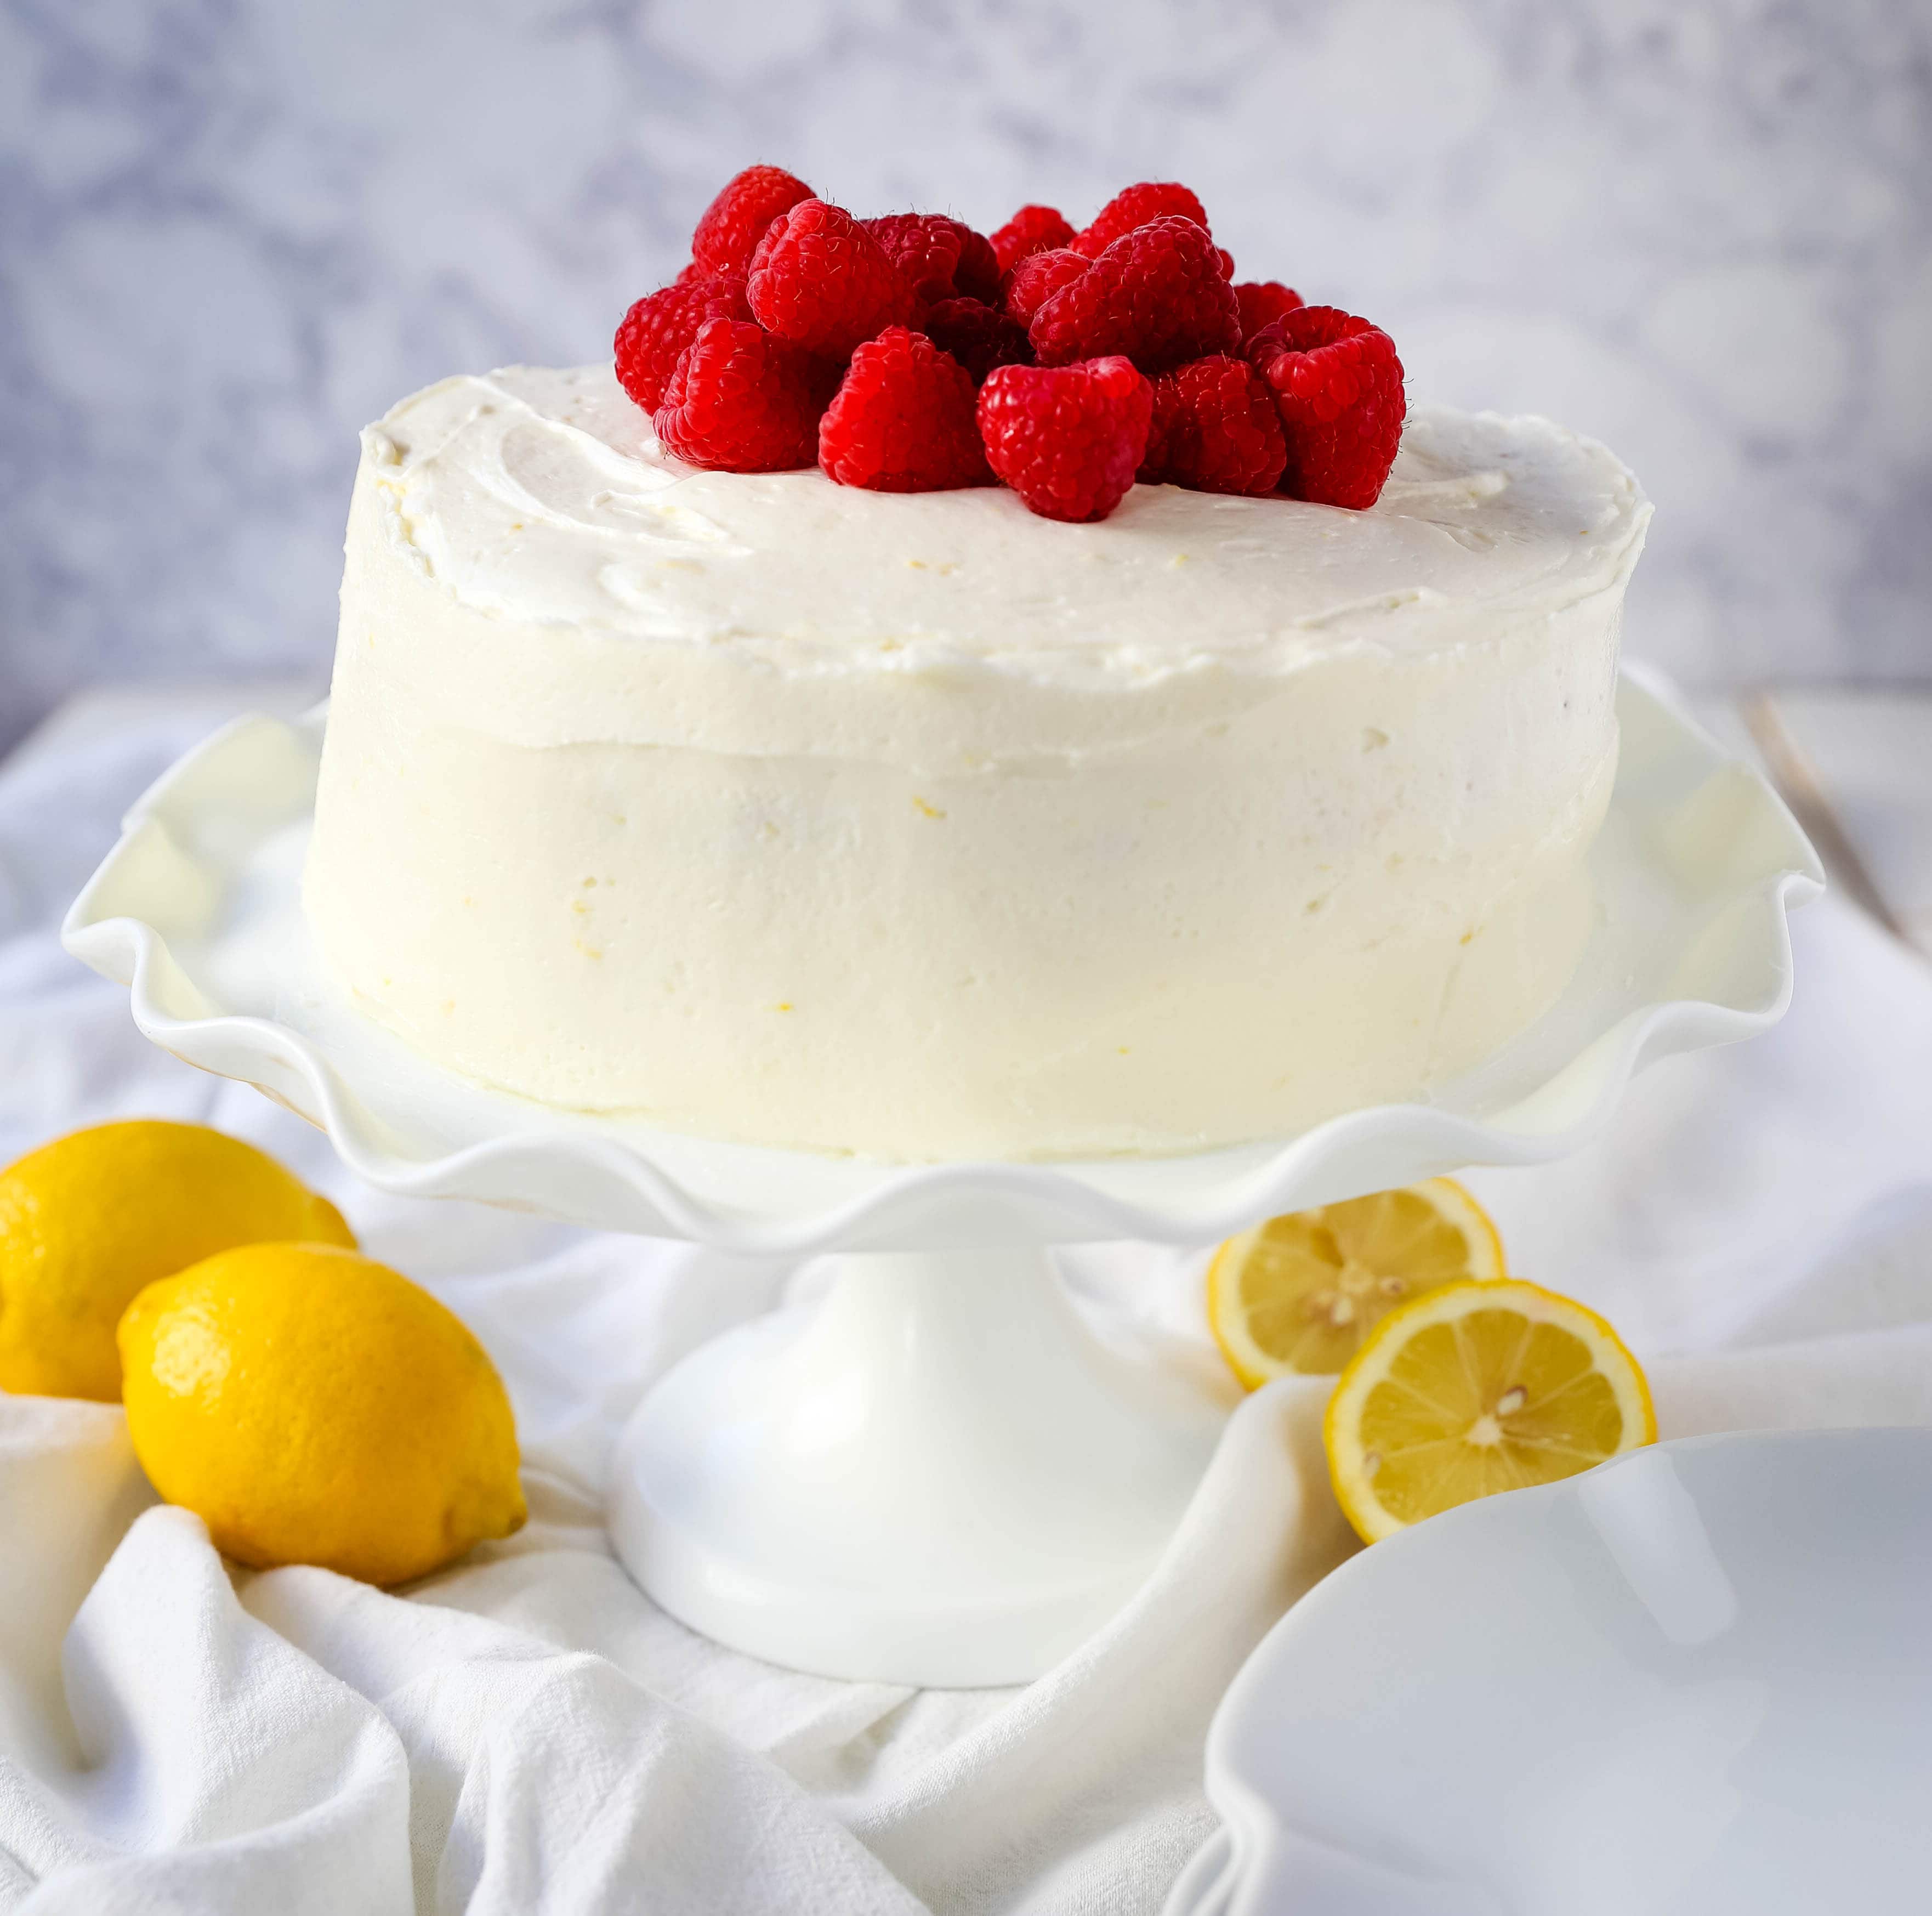 The Best Lemon Raspberry Cake. A light and fluffy lemon cake with fresh raspberries and a fresh lemon cream cheese frosting. A sweet and tangy lemon berry cake! #lemoncake #cake #lemonraspberrycake